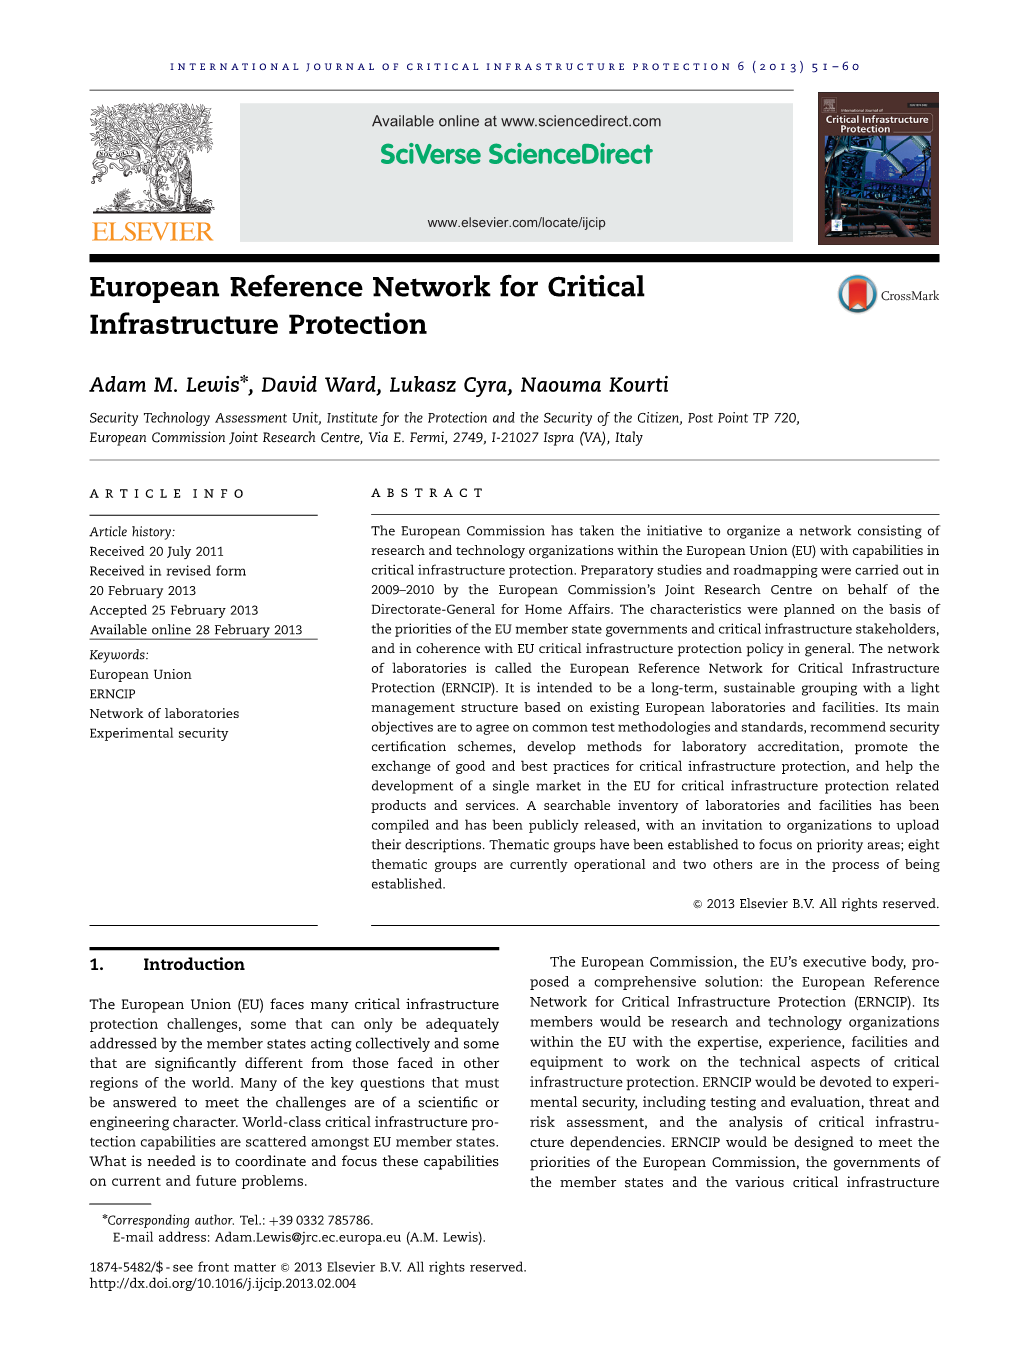 European Reference Network for Critical Infrastructure Protection